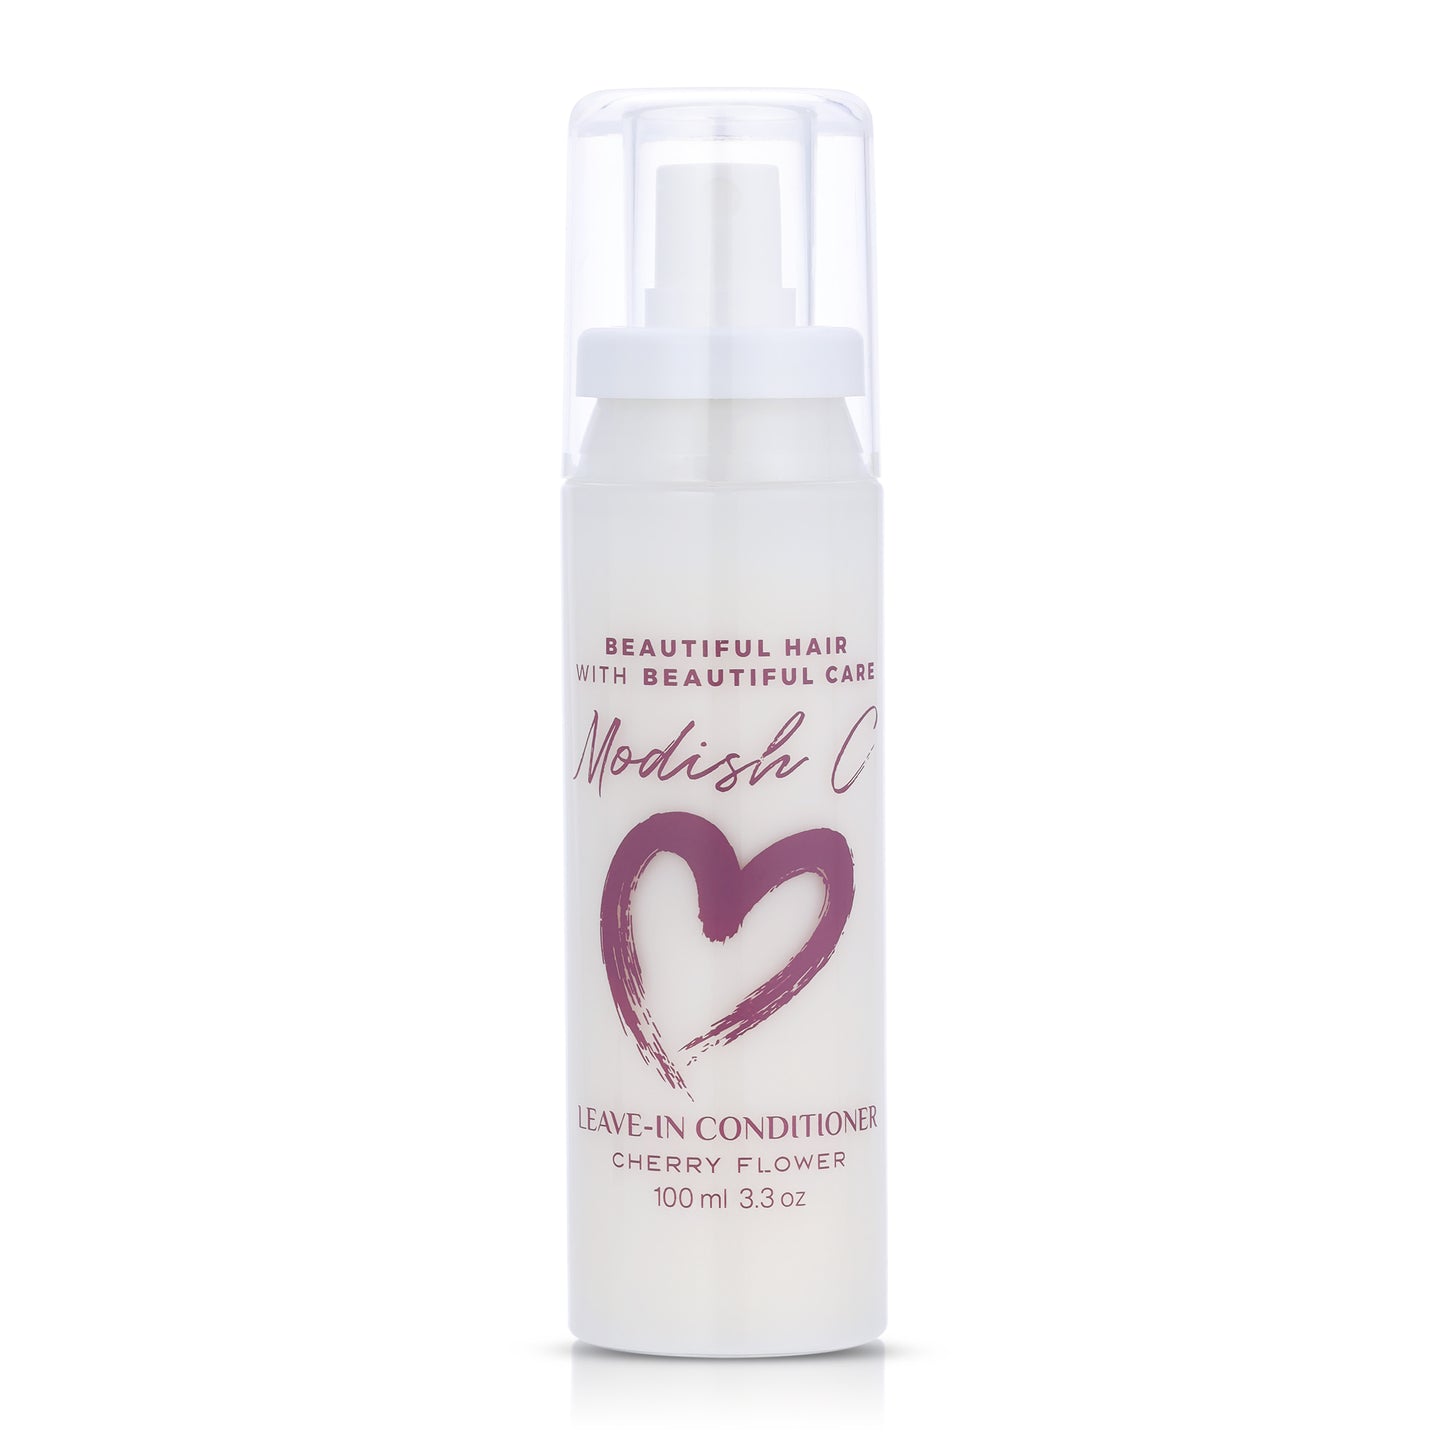 CHERRY FLOWER LEAVE-IN CONDITIONER